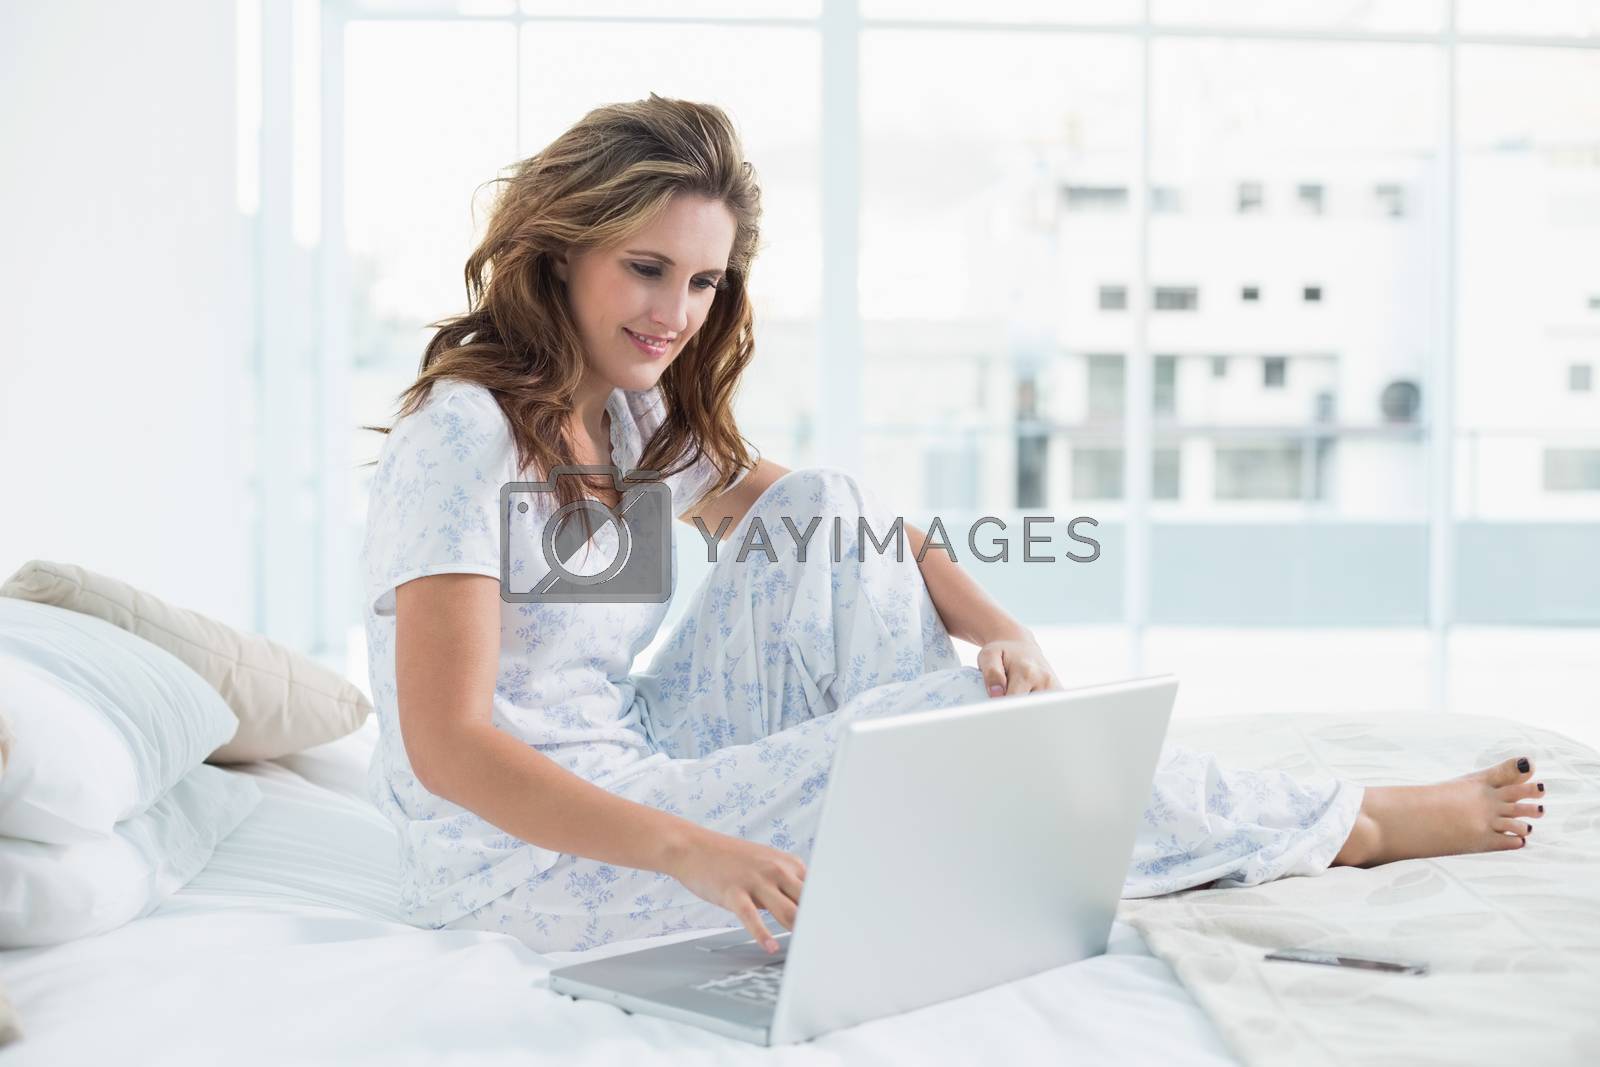 Royalty free image of Young woman sitting on cosy bed by Wavebreakmedia